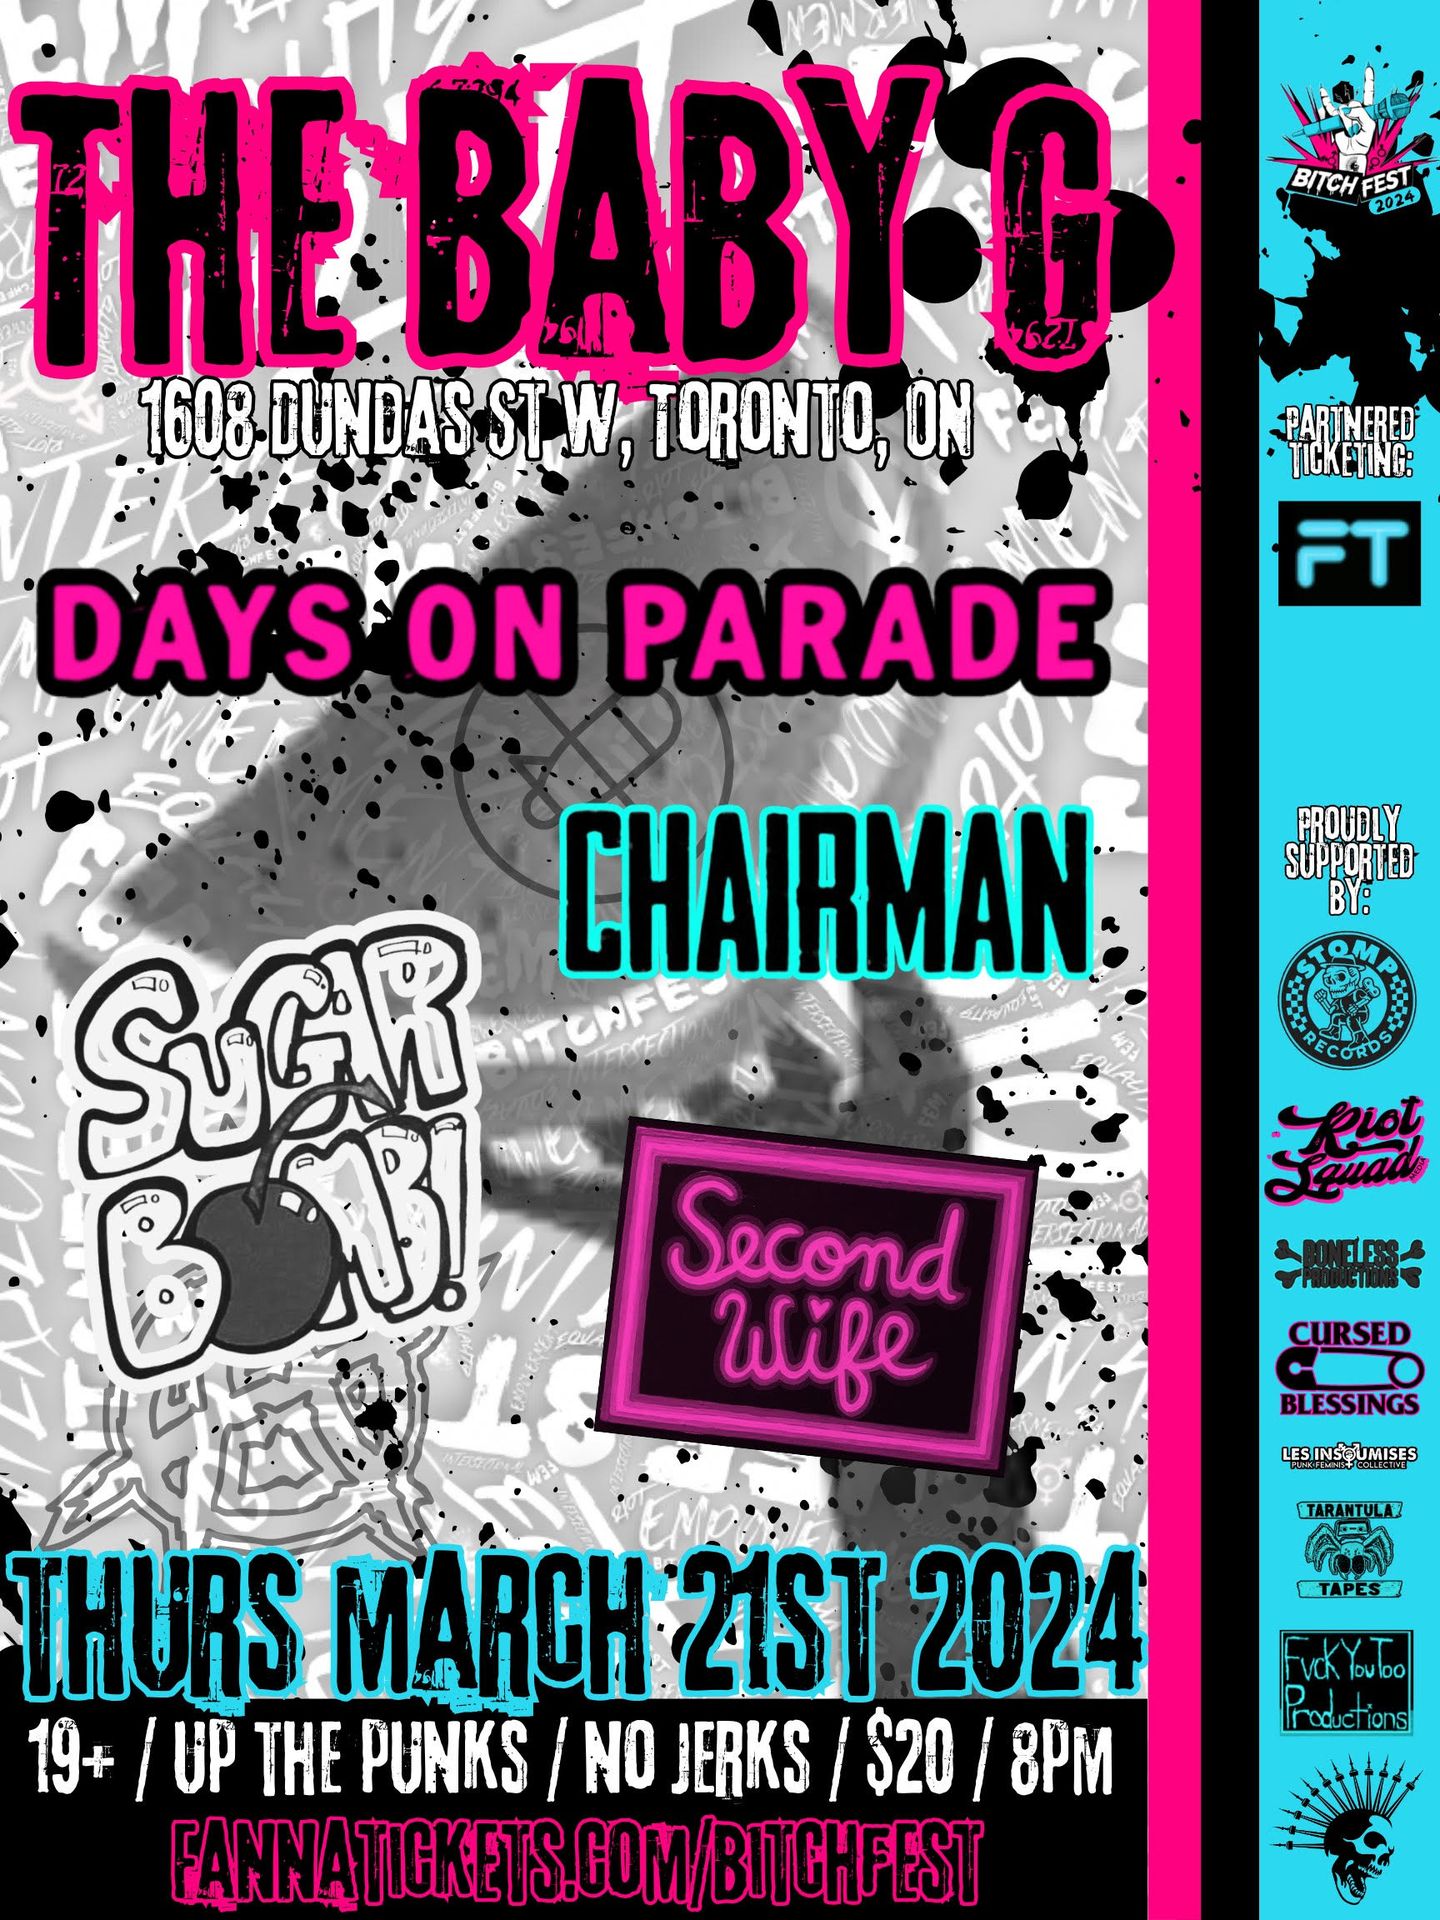 https://fannatickets.com/event/bitchfest-sugar-bomb-days-on-parade-chairman-and-second-wife-at-the-baby-g-toronto-101/register